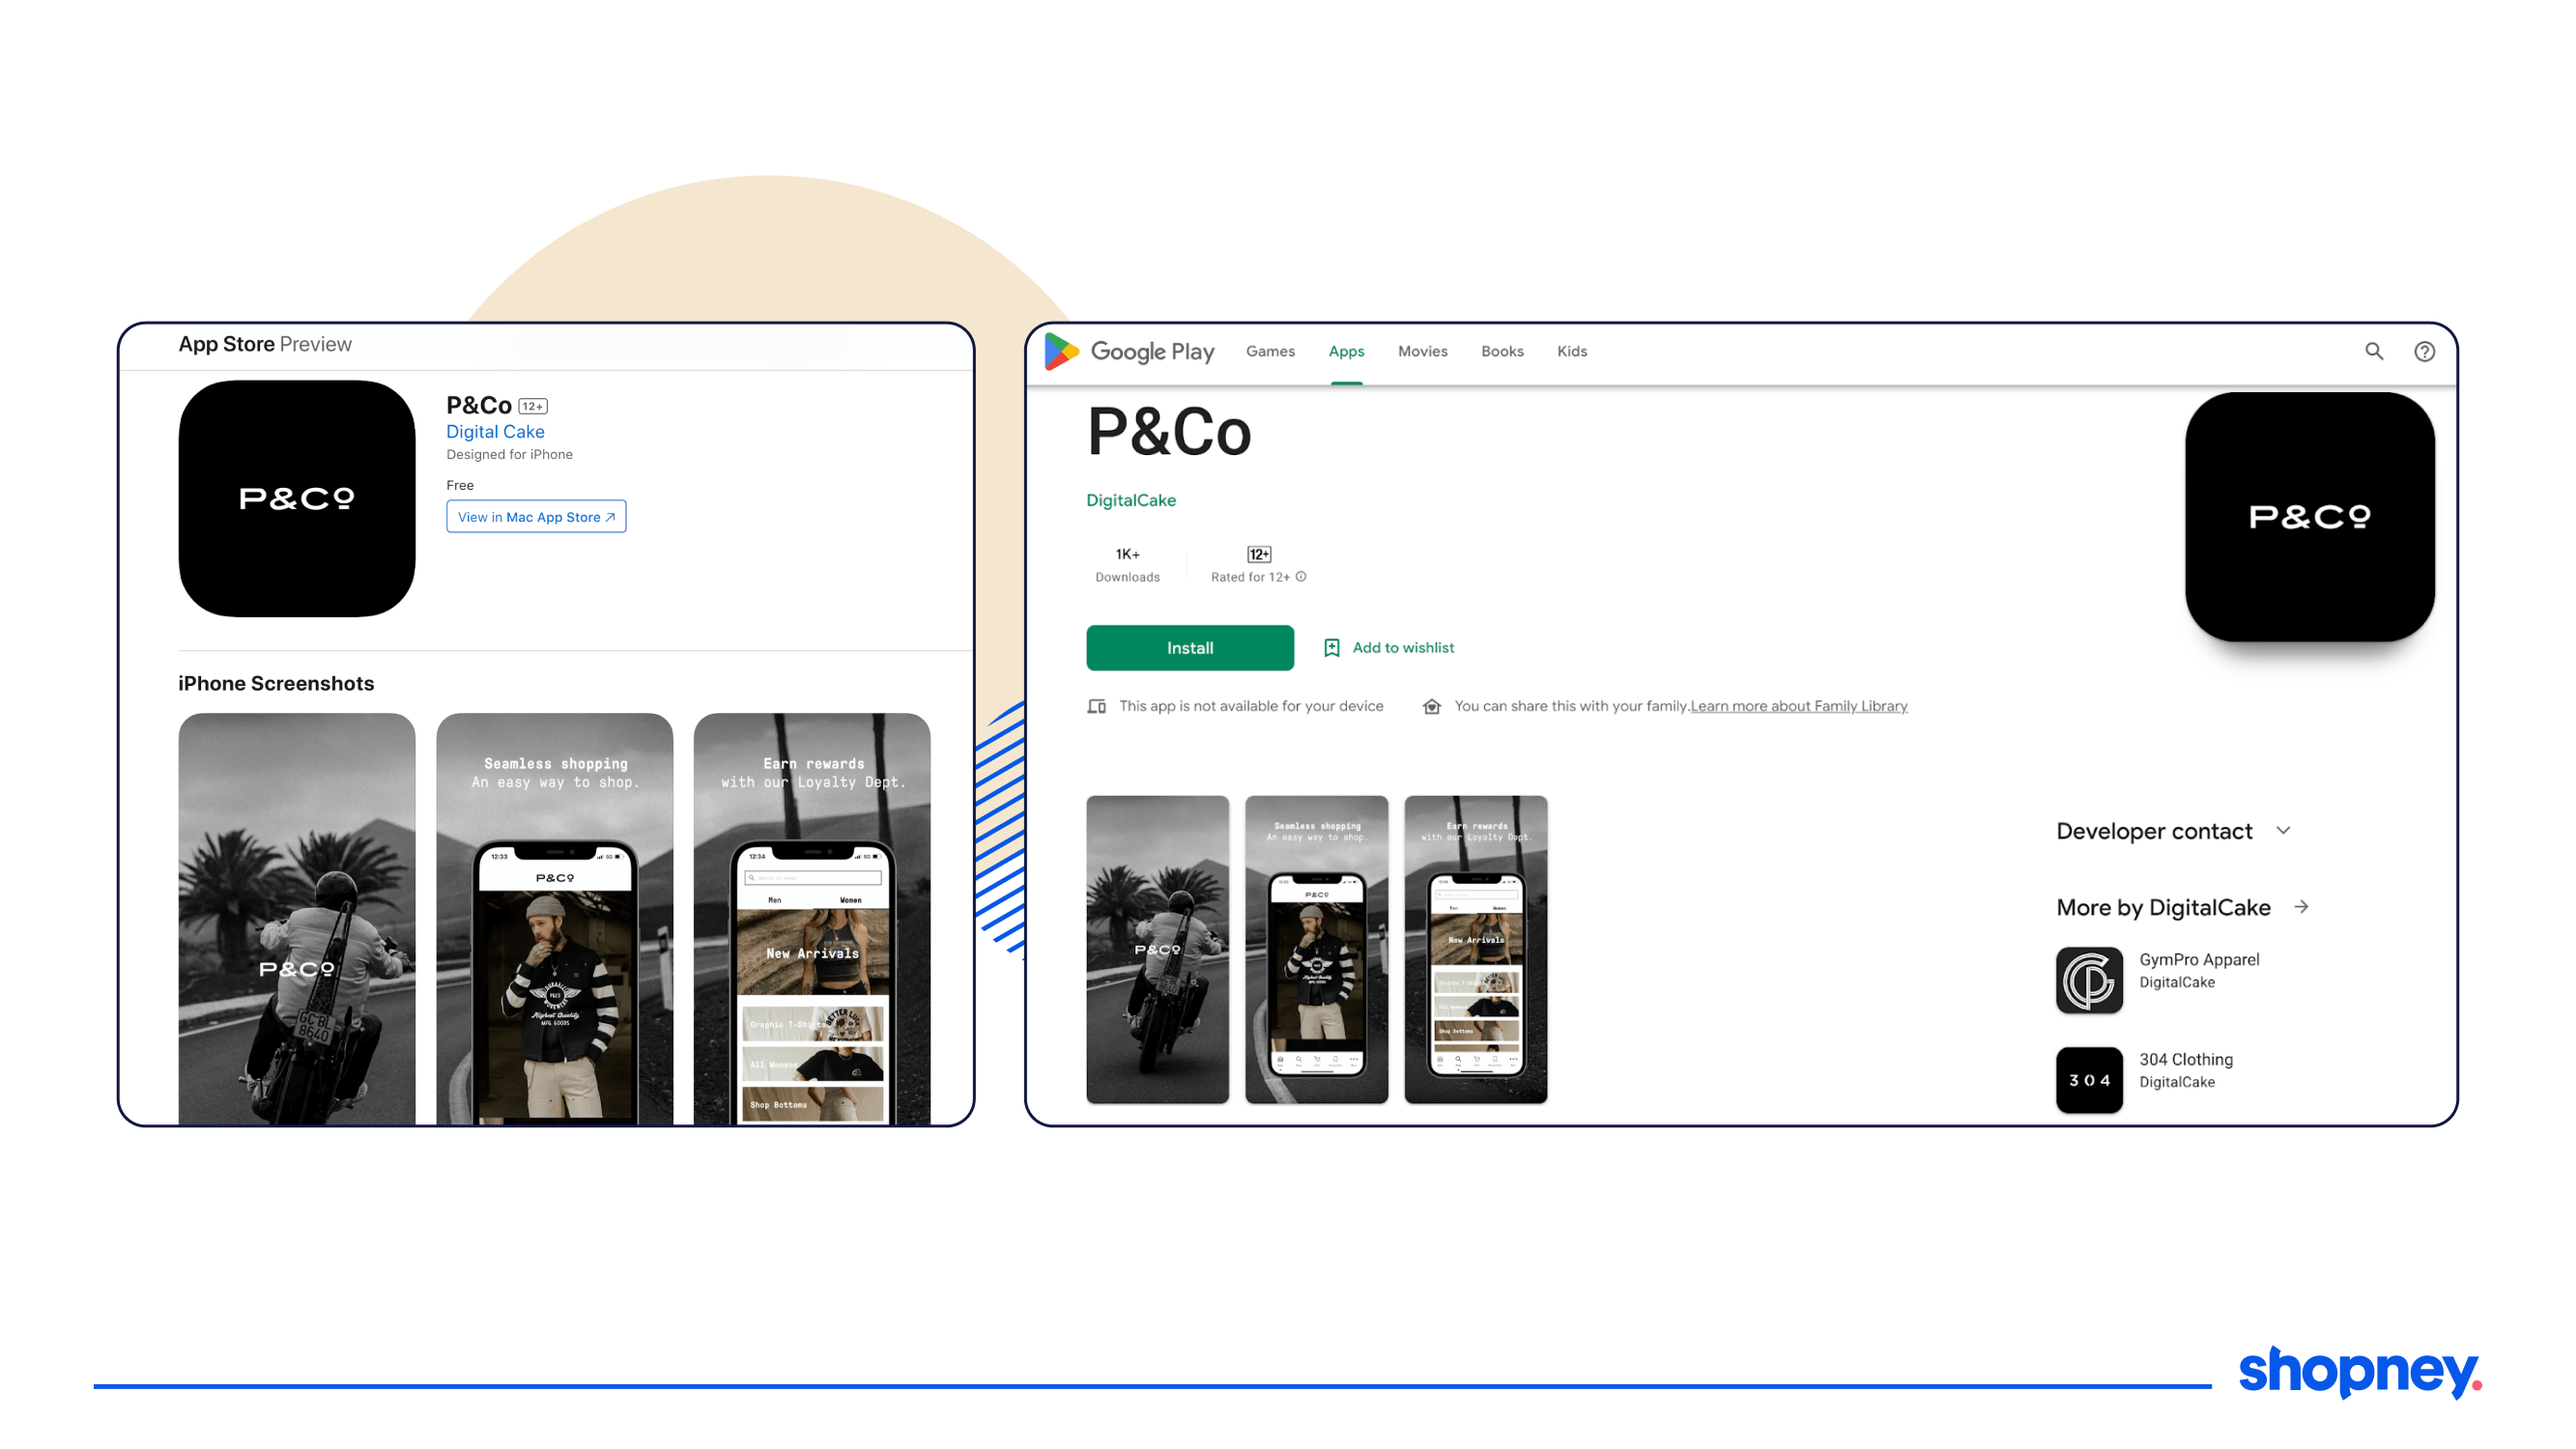 P&Co on AppStore and Google Play Store